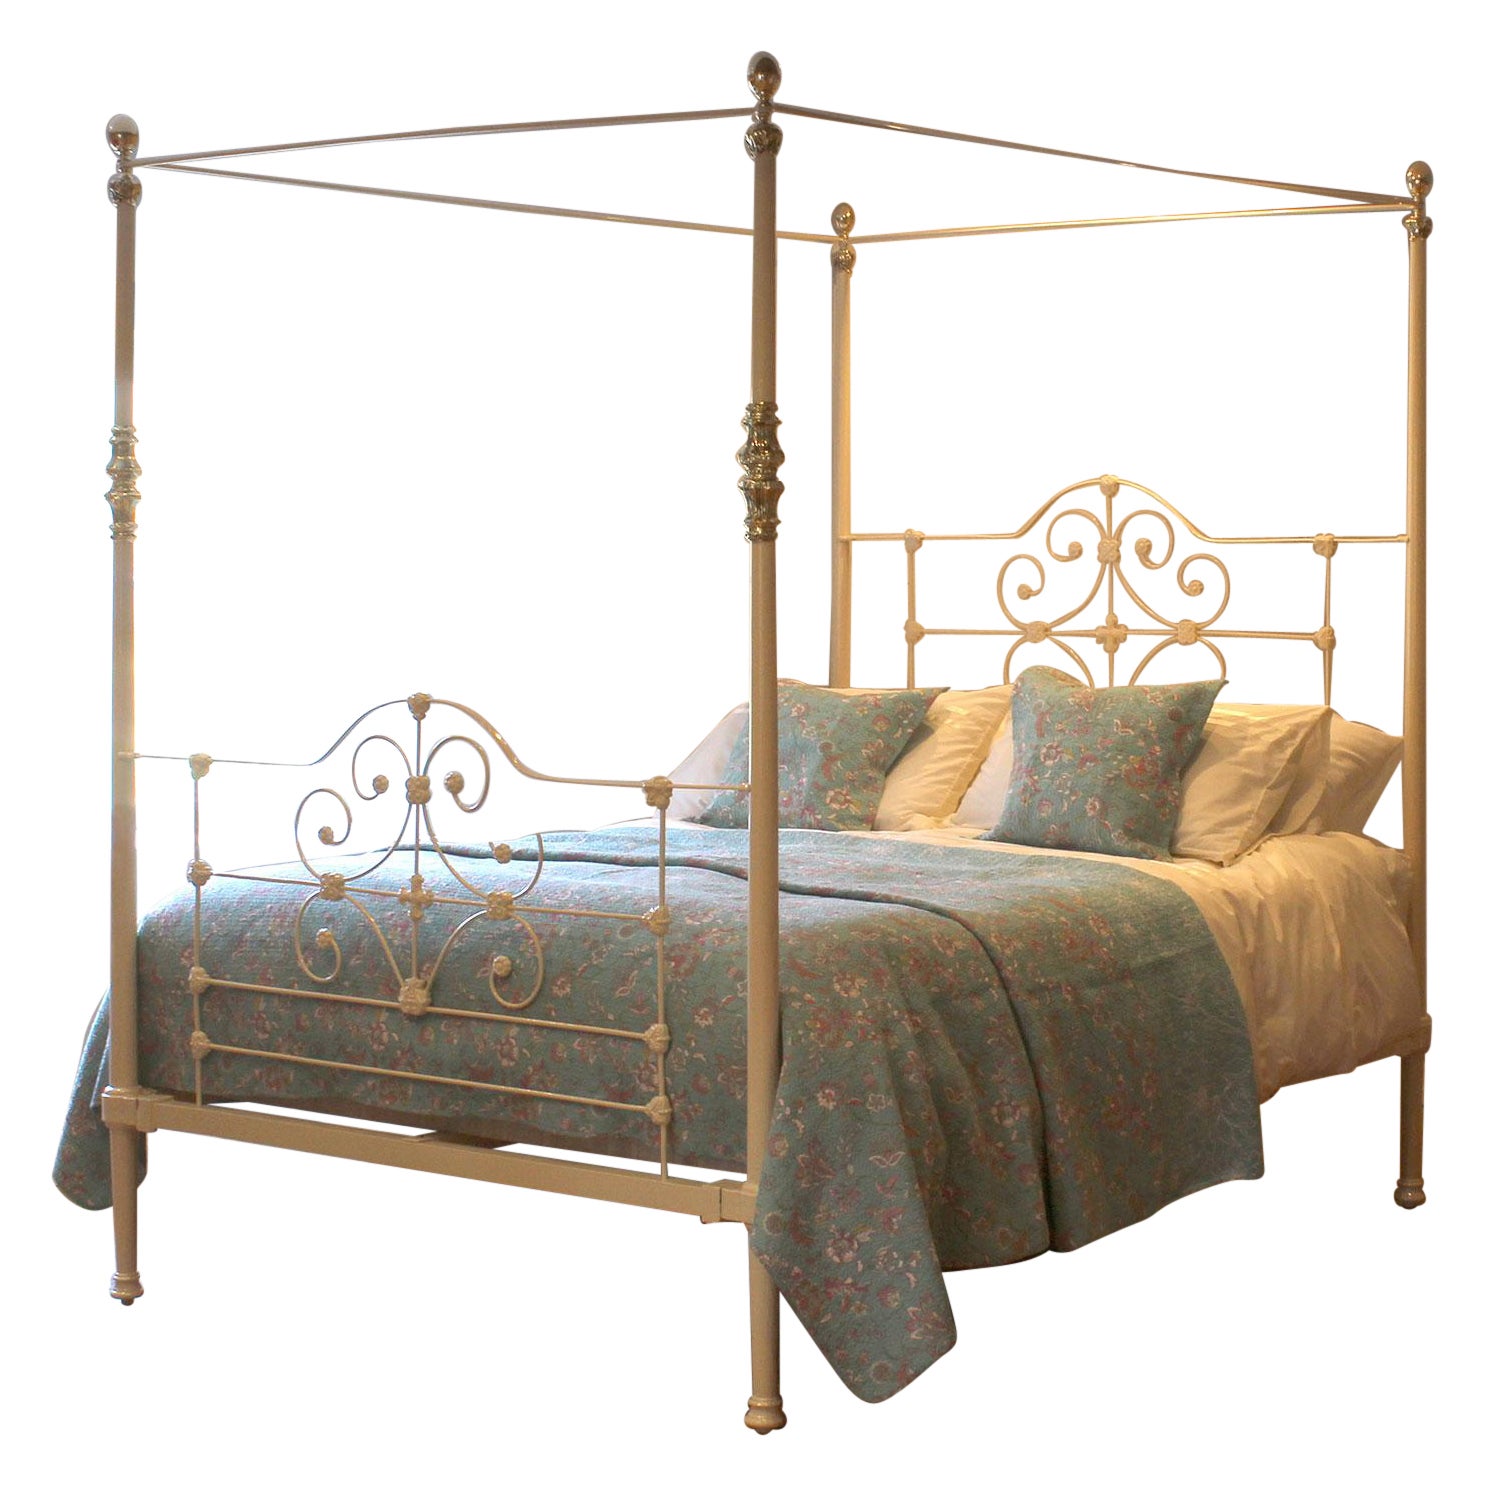 5ft Wide Cast Iron Four Poster Bed in Cream, M4P49 For Sale